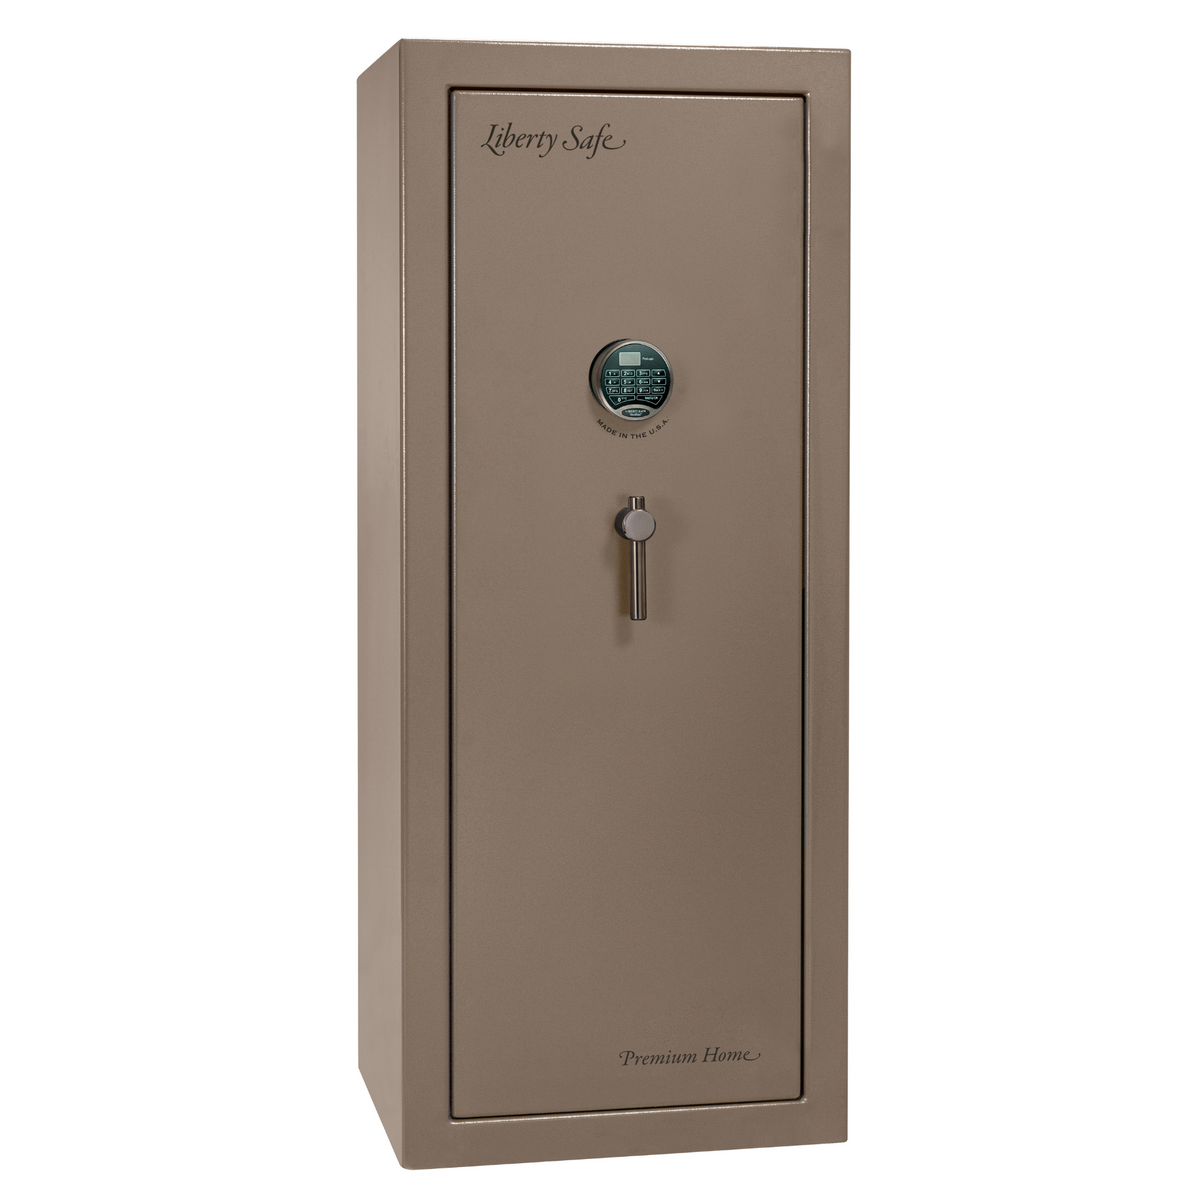 Premium Home Series | Level 7 Security | 2 Hour Fire Protection | 17 | Dimensions: 59.25&quot;(H) x 24&quot;(W) x 20.25&quot;(D) | Champagne Marble - Closed Door